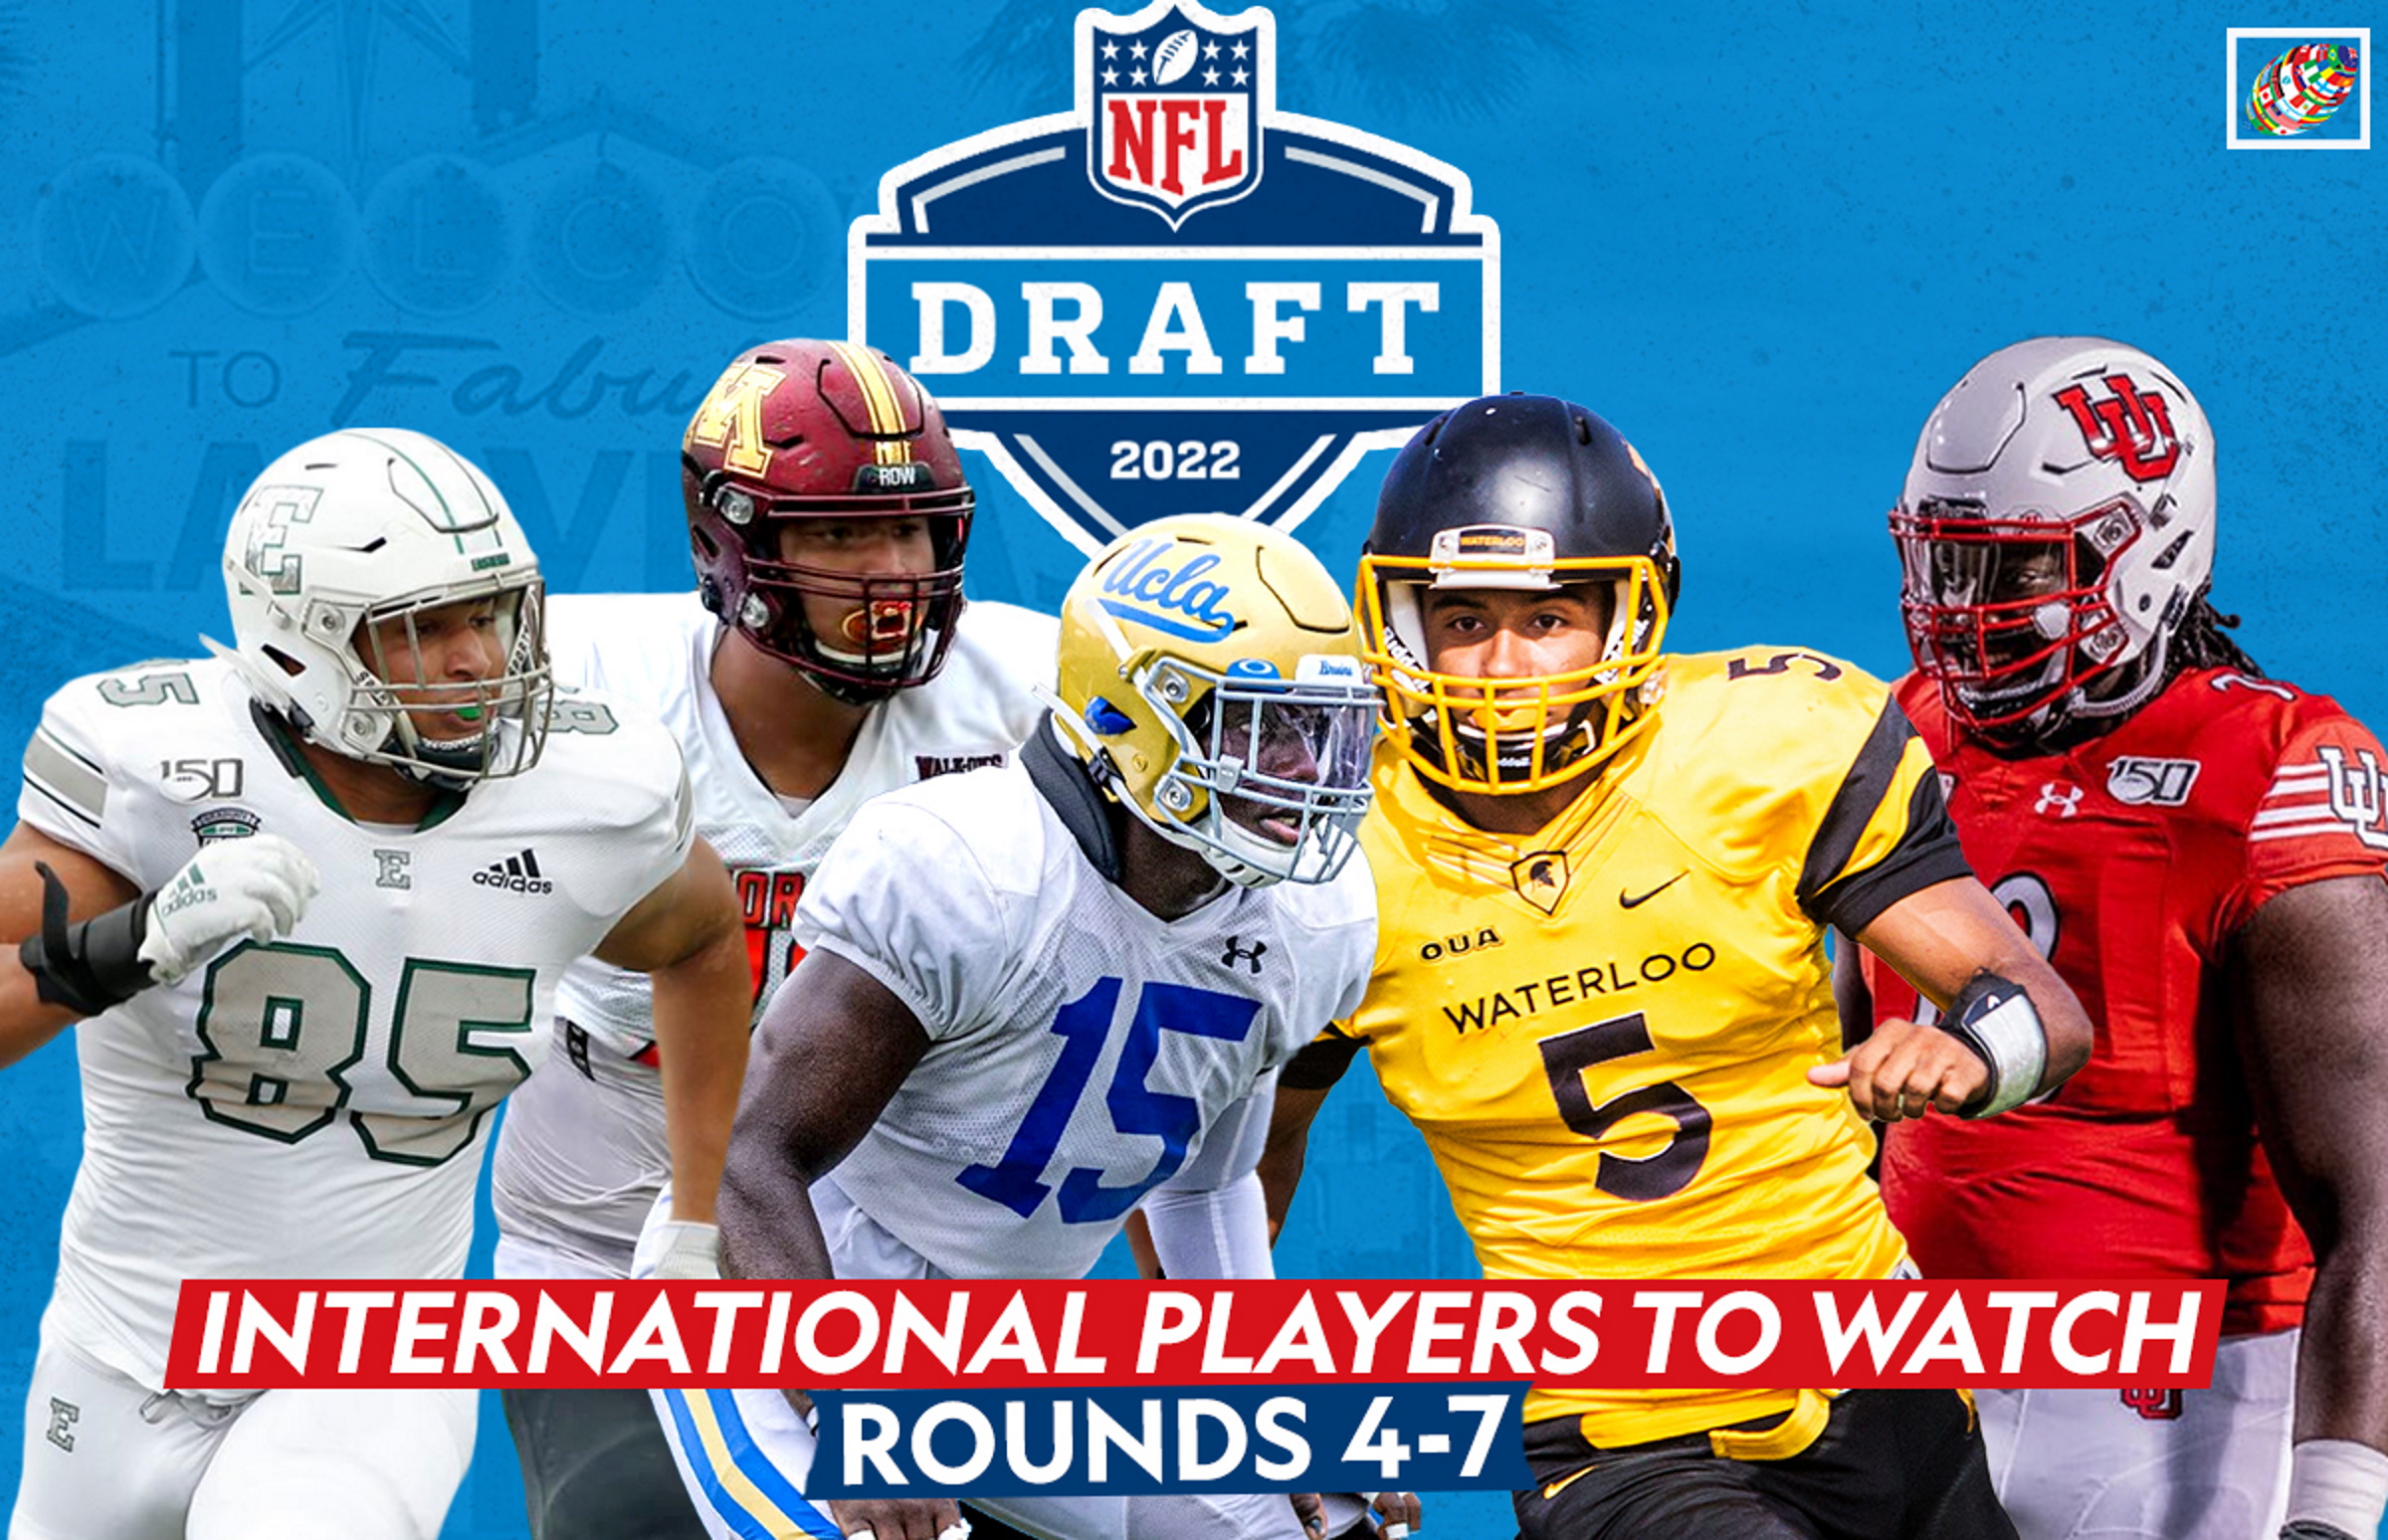 NFL Draft 2022 Day 3 International Players stay patient in the drafts final stages